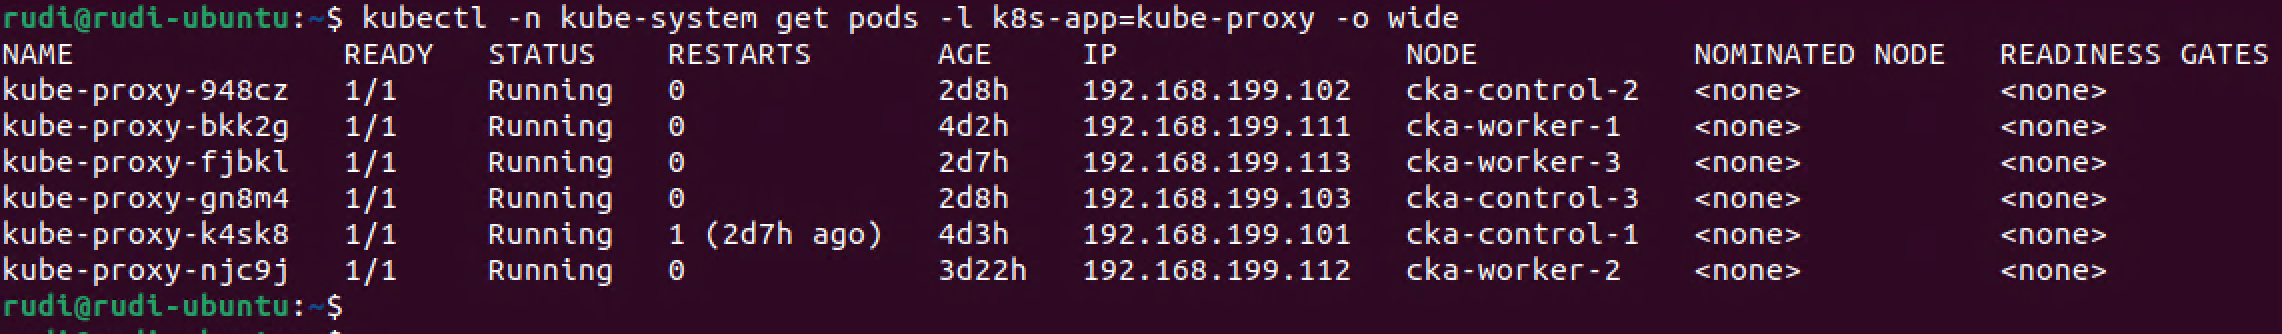 Get pods for kube-proxy